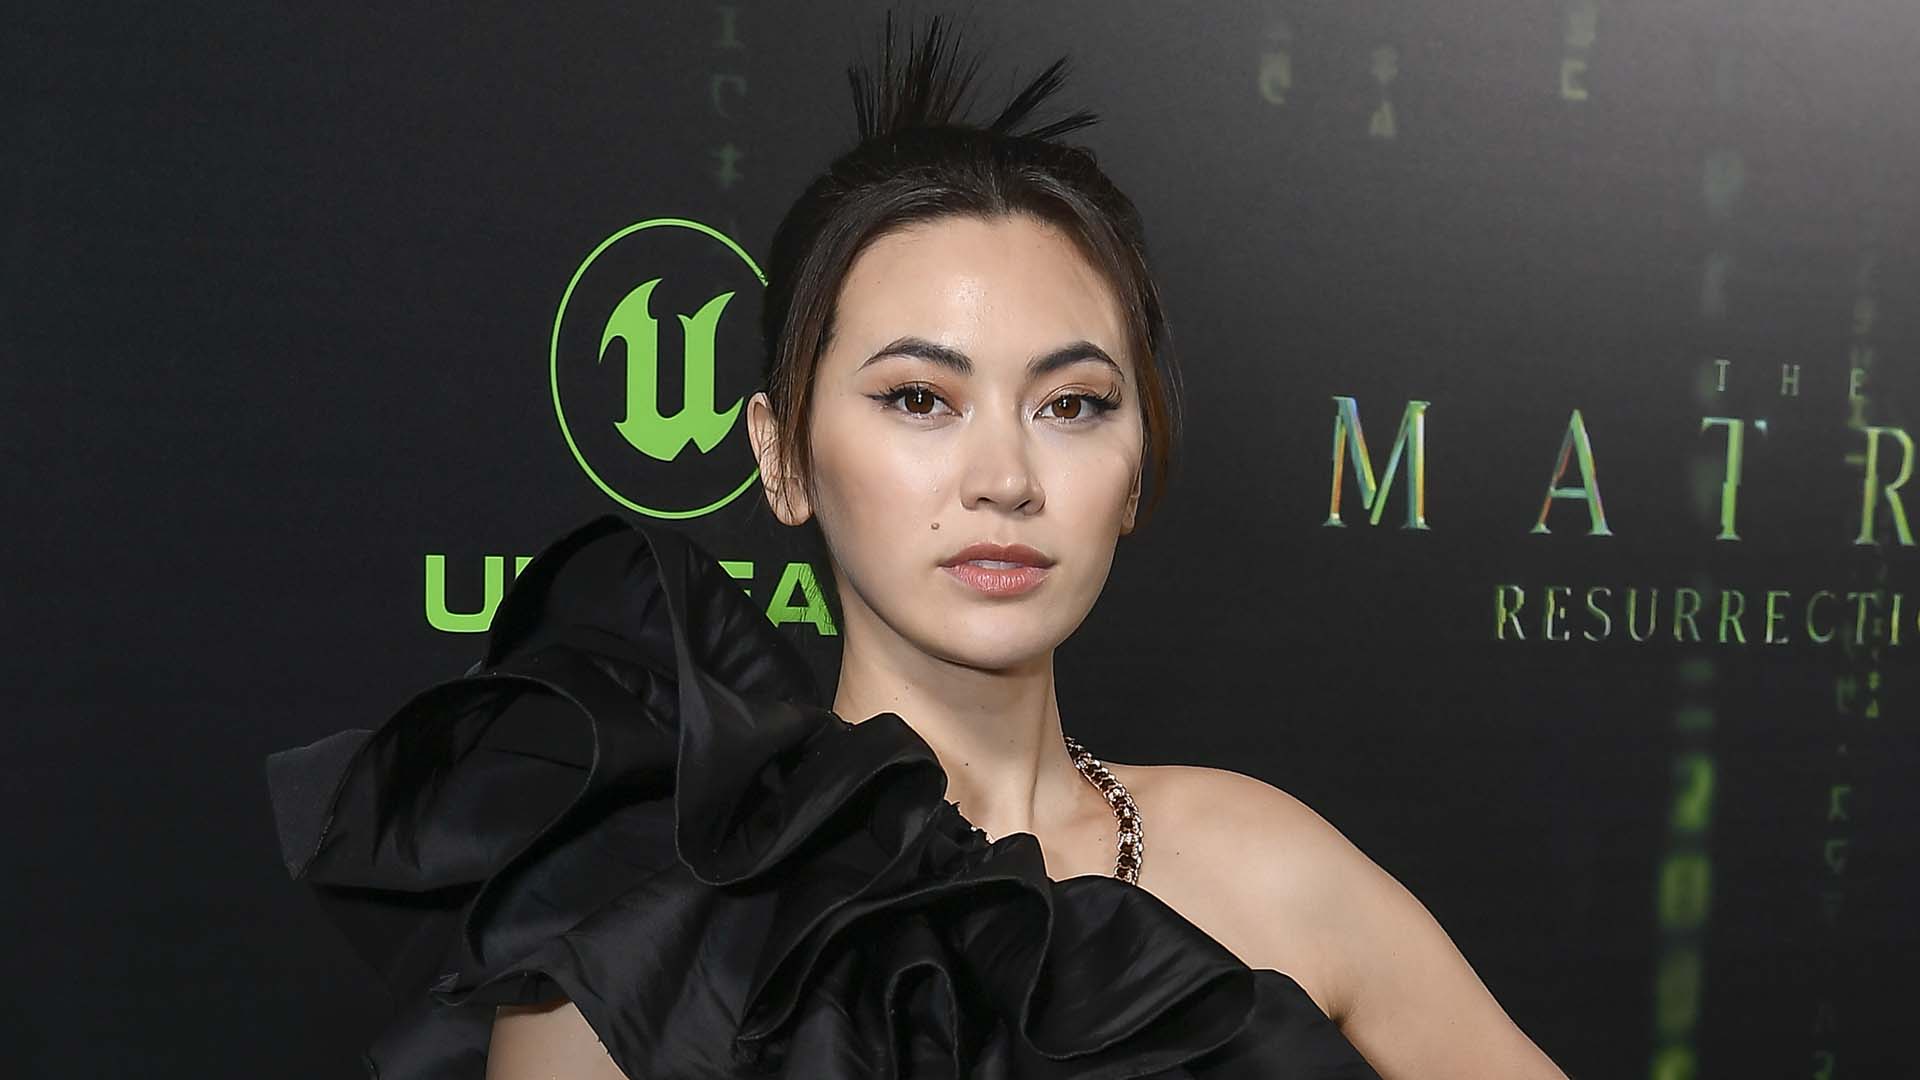 Jessica Henwick Talks About the Return of ‘The Matrix’ and Taking the Lead 